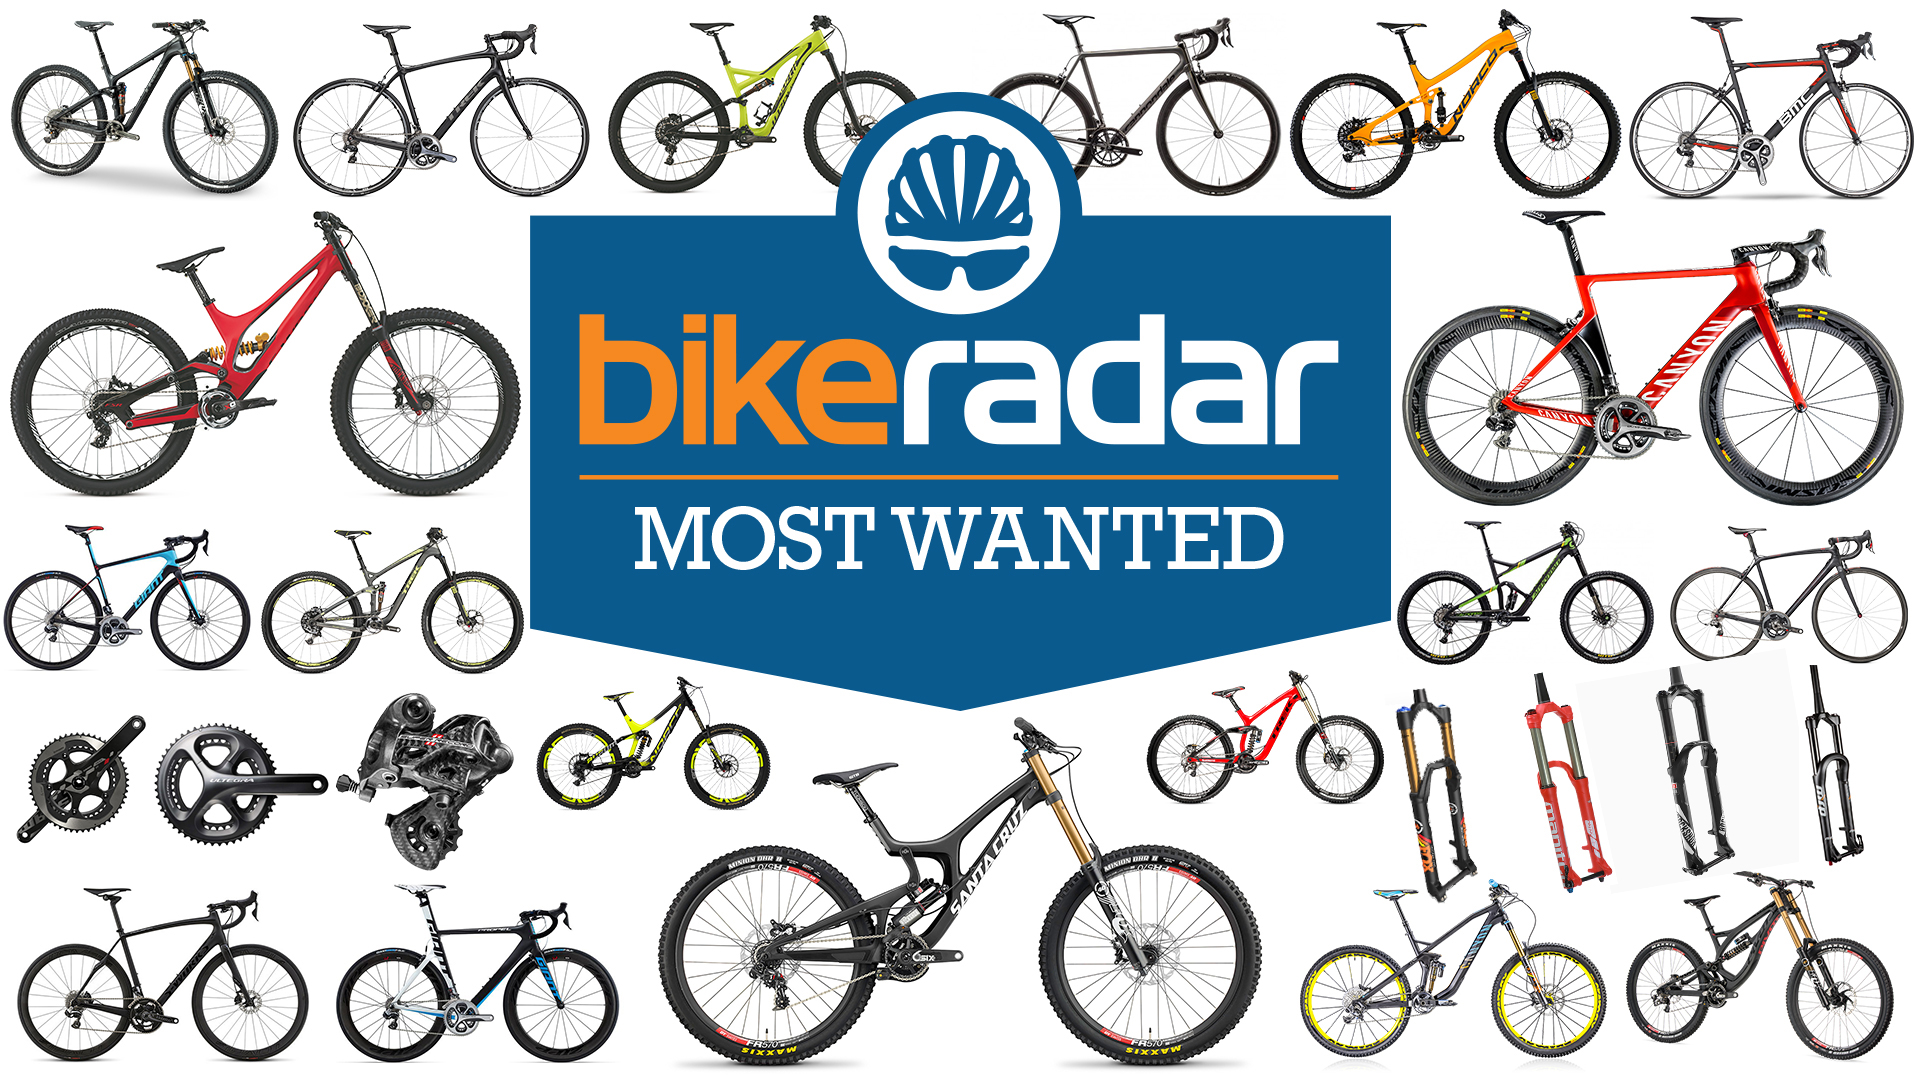 Photo: BikeRadar received more than 69,000 votes for the Most Wanted Awards. 